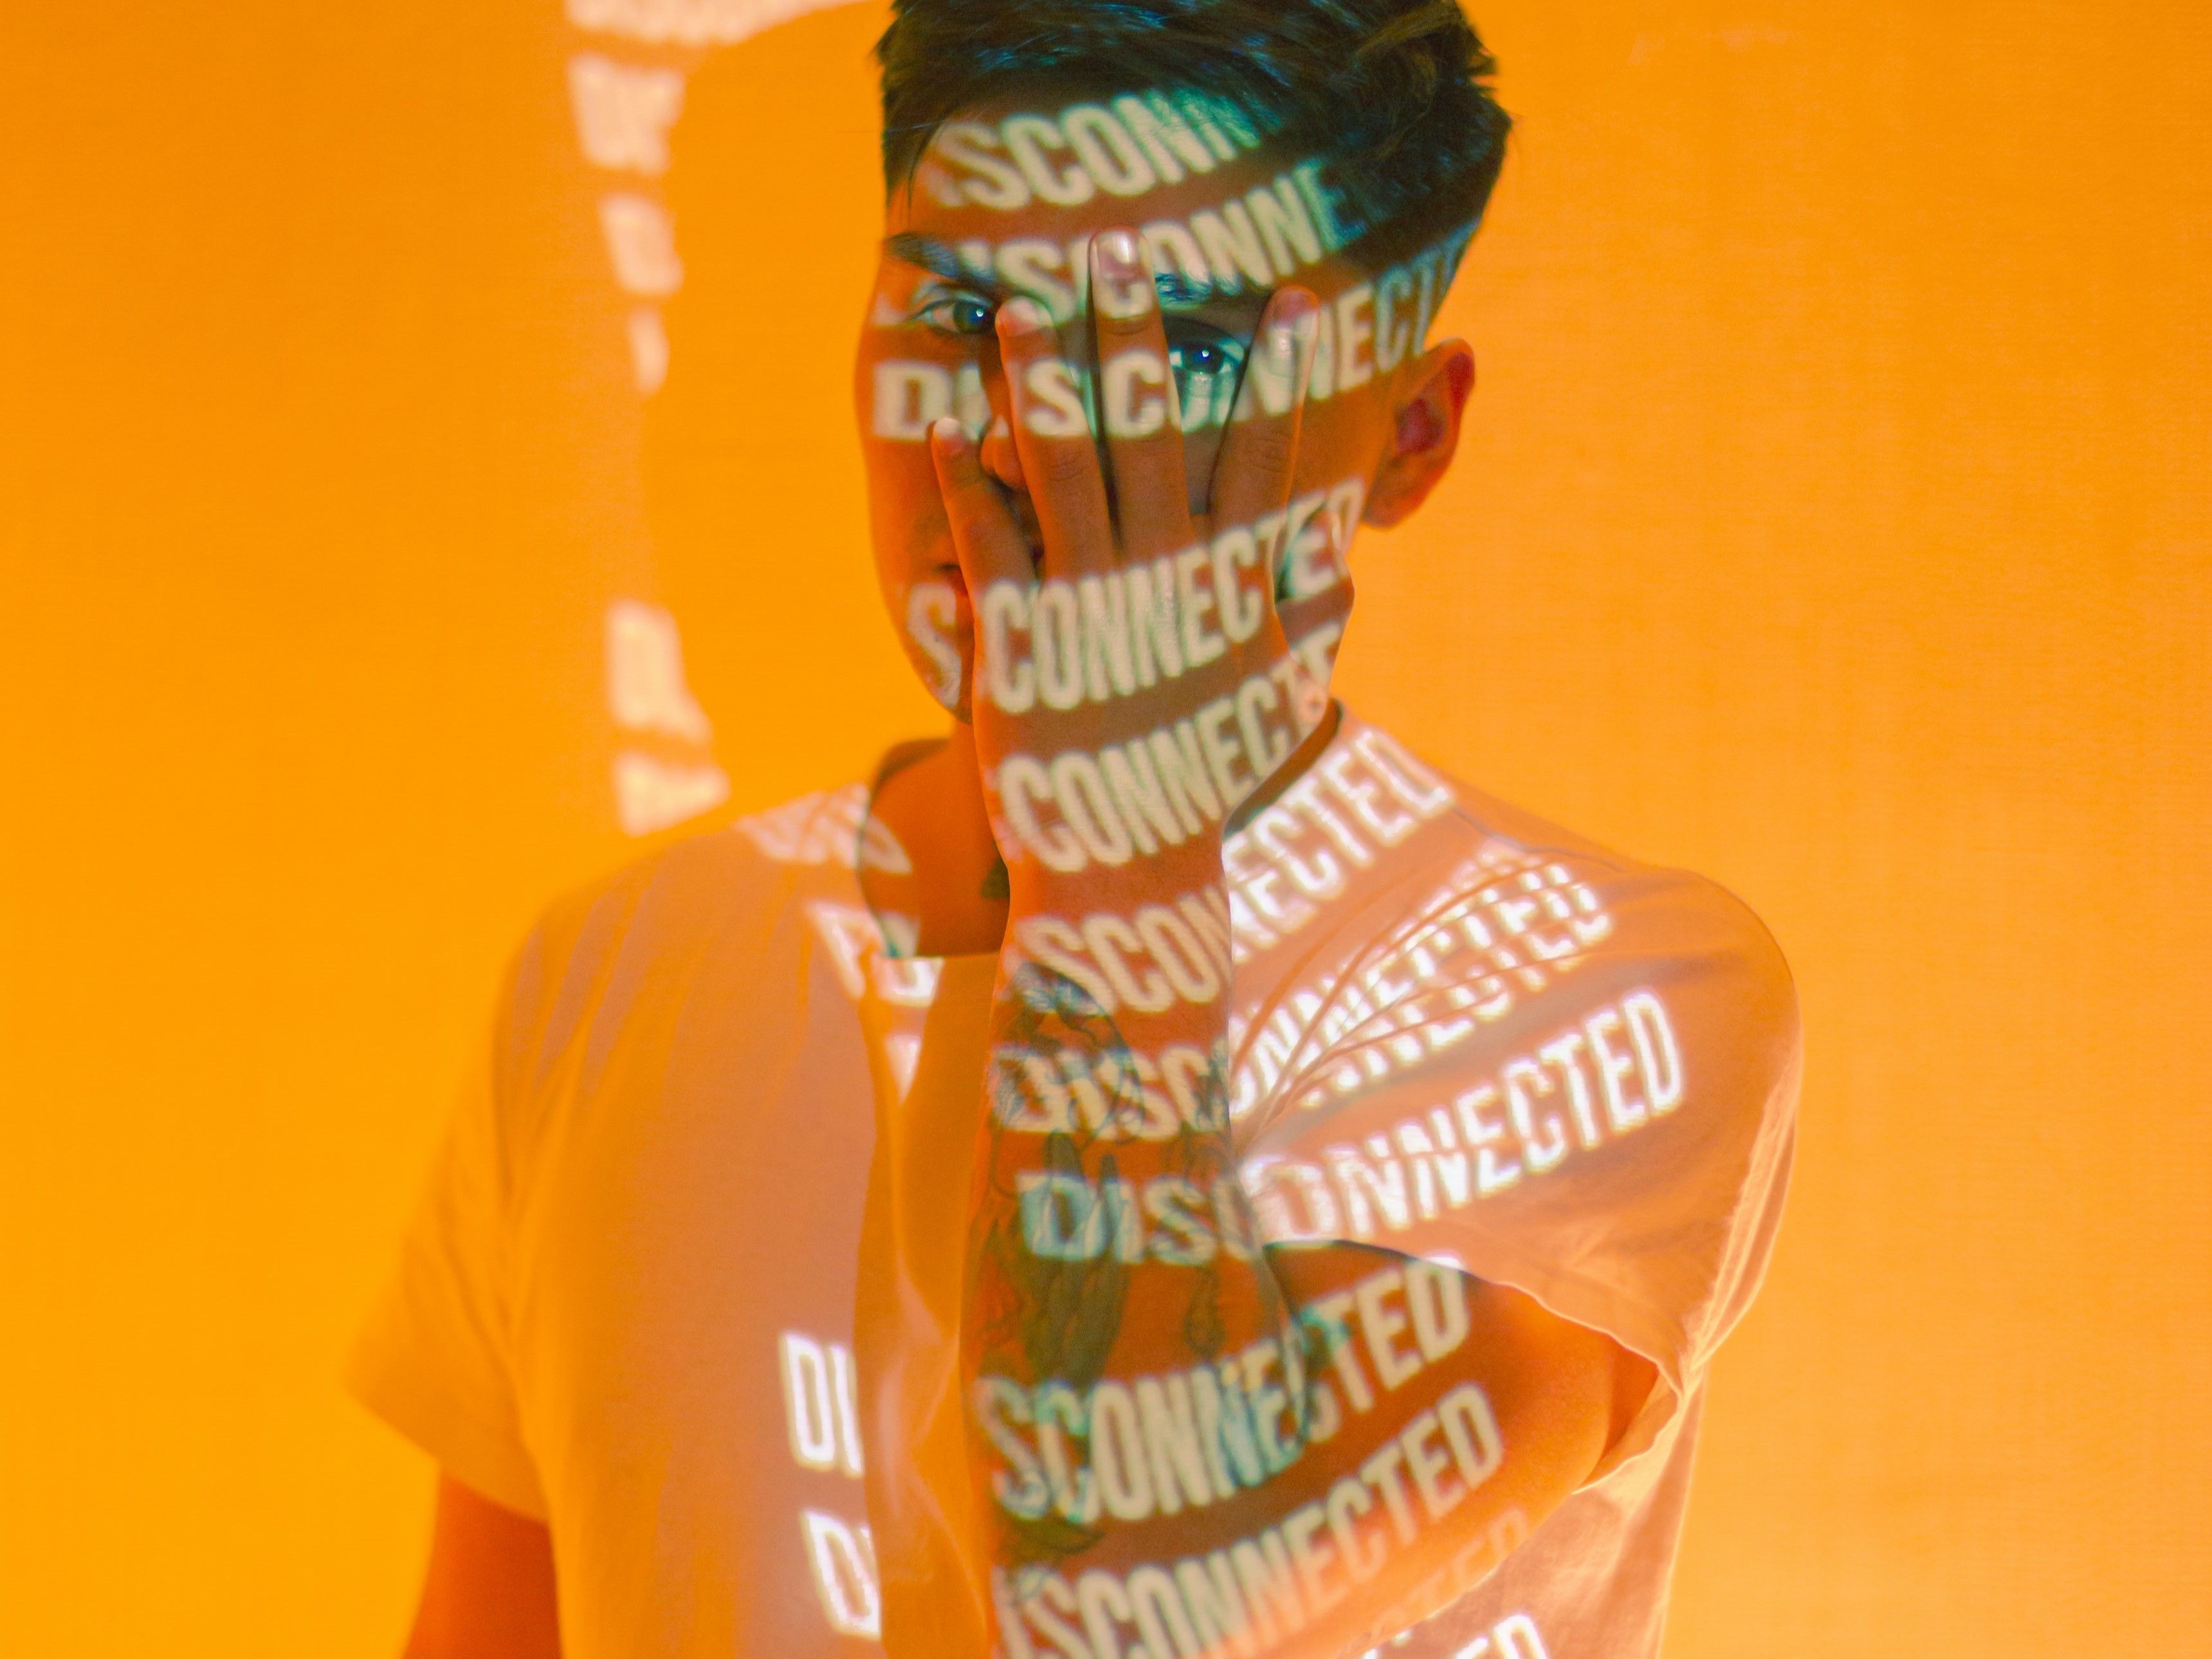 Man With Hand Covering Face Against Yellow Background With the Words Disconnected Projected